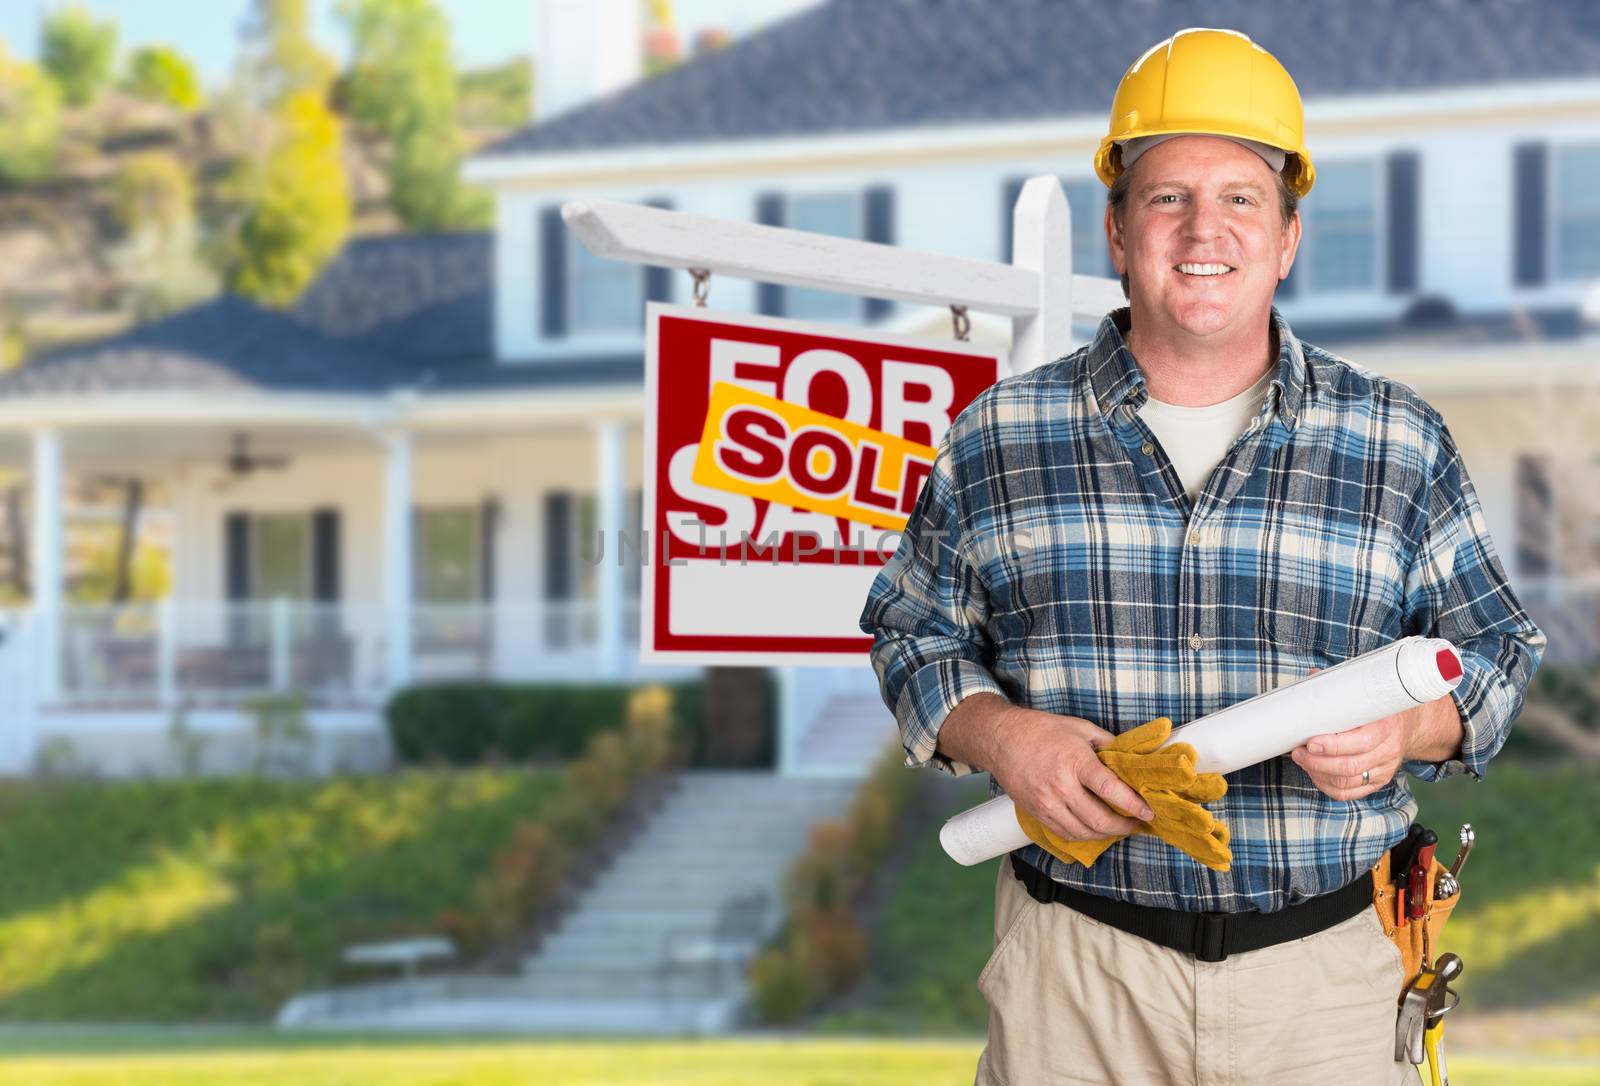 Contractor With Plans and Hard Hat In Front of Sold For Sale Real Estate Sign and House.